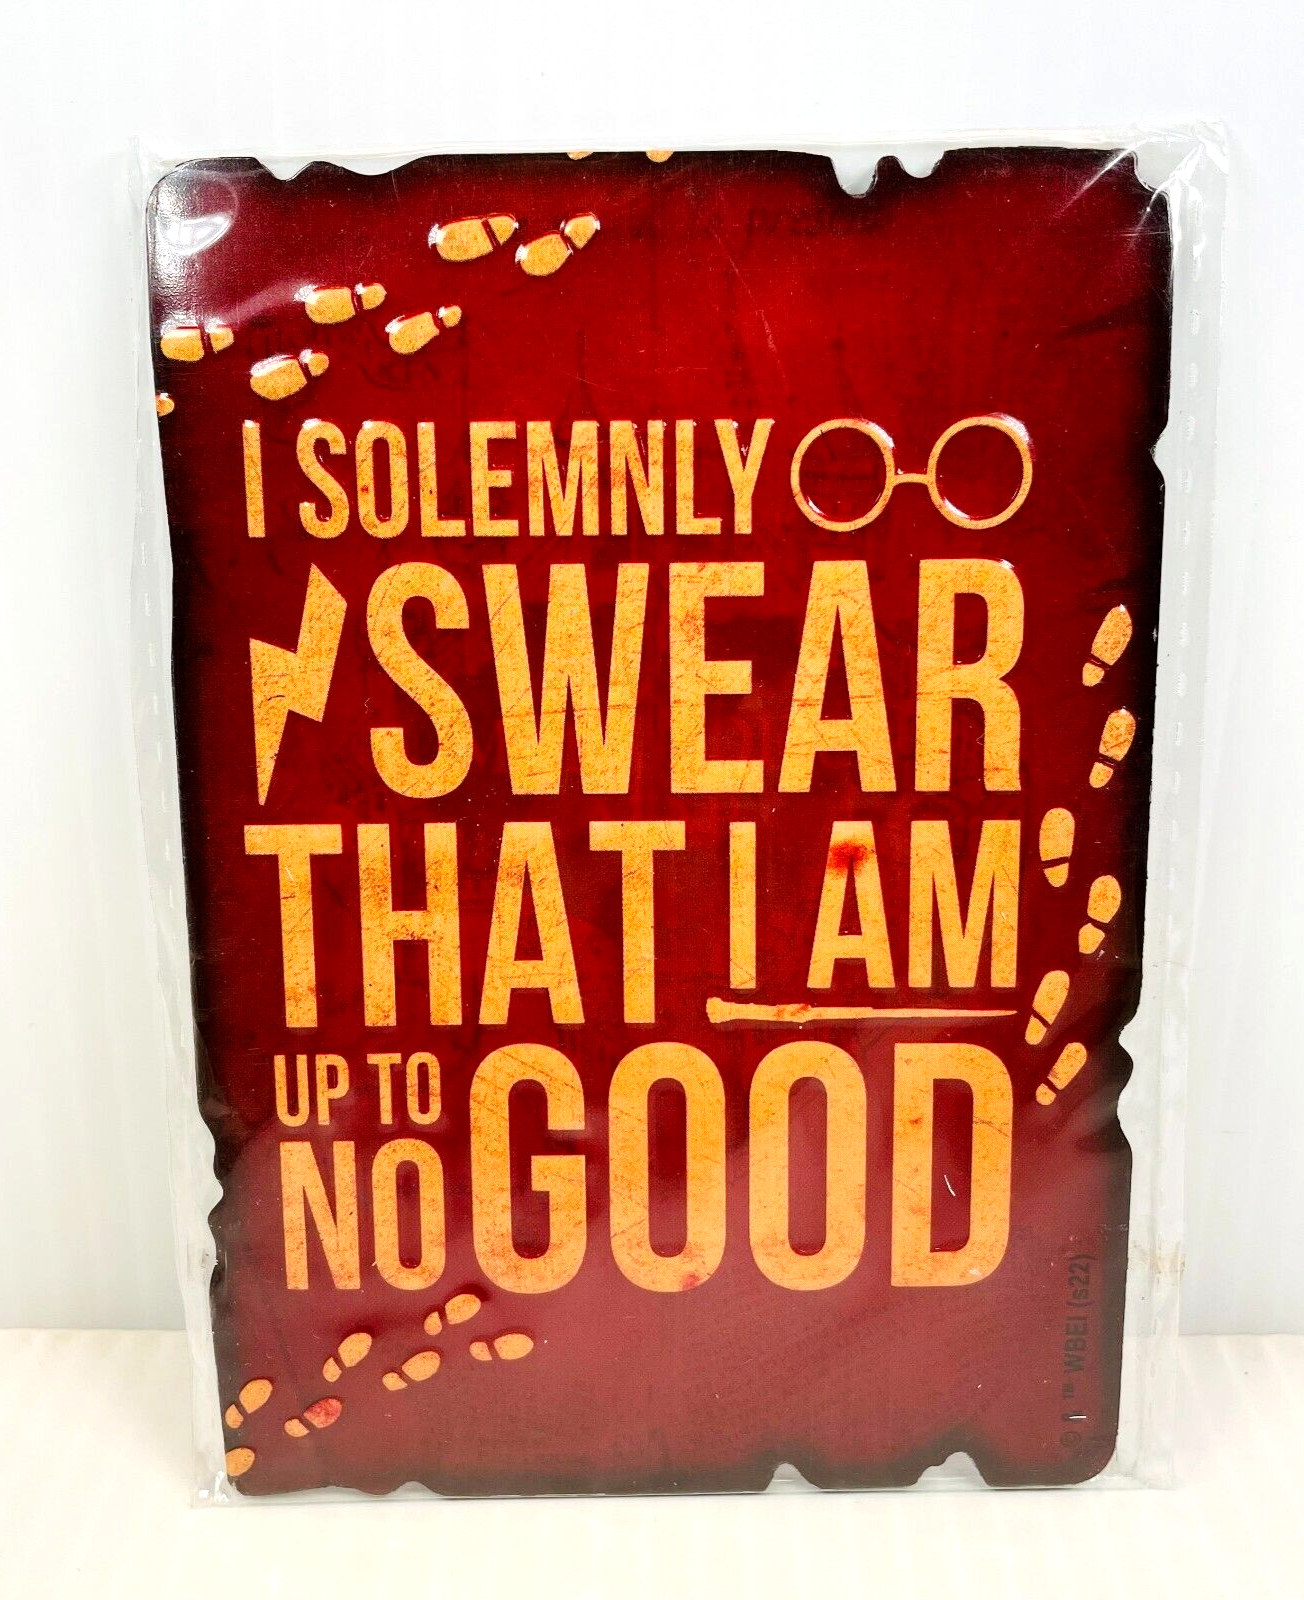 Harry Potter 5 x 3.5 Inch Magnet "I Solemnly Swear That I Am Up to No Good"